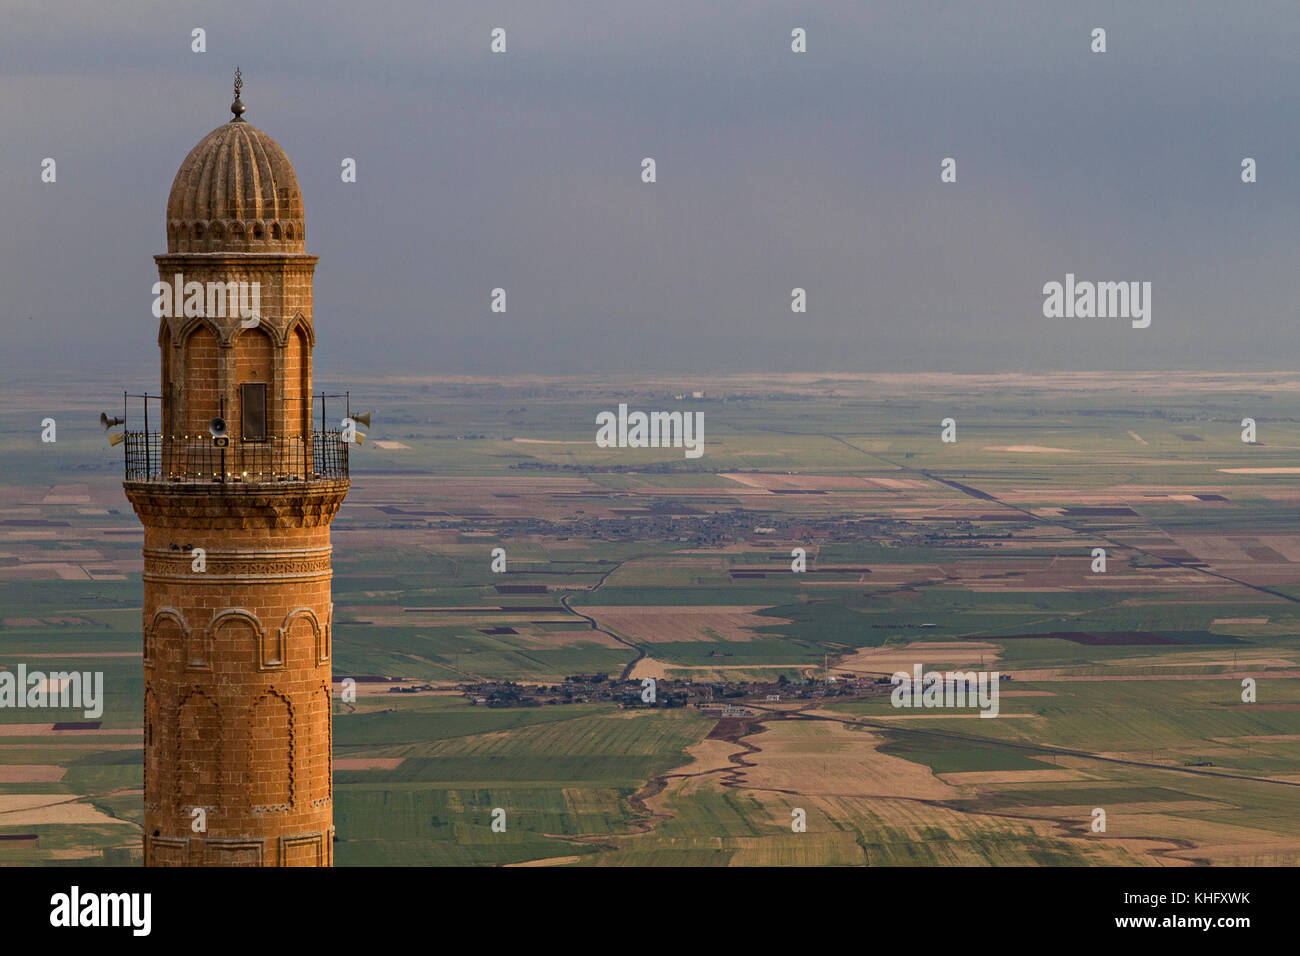 Minaret of the Great Mosque known also as Ulu Cami with mesopotamian plain in the background, Mardin, Turkey. Stock Photo